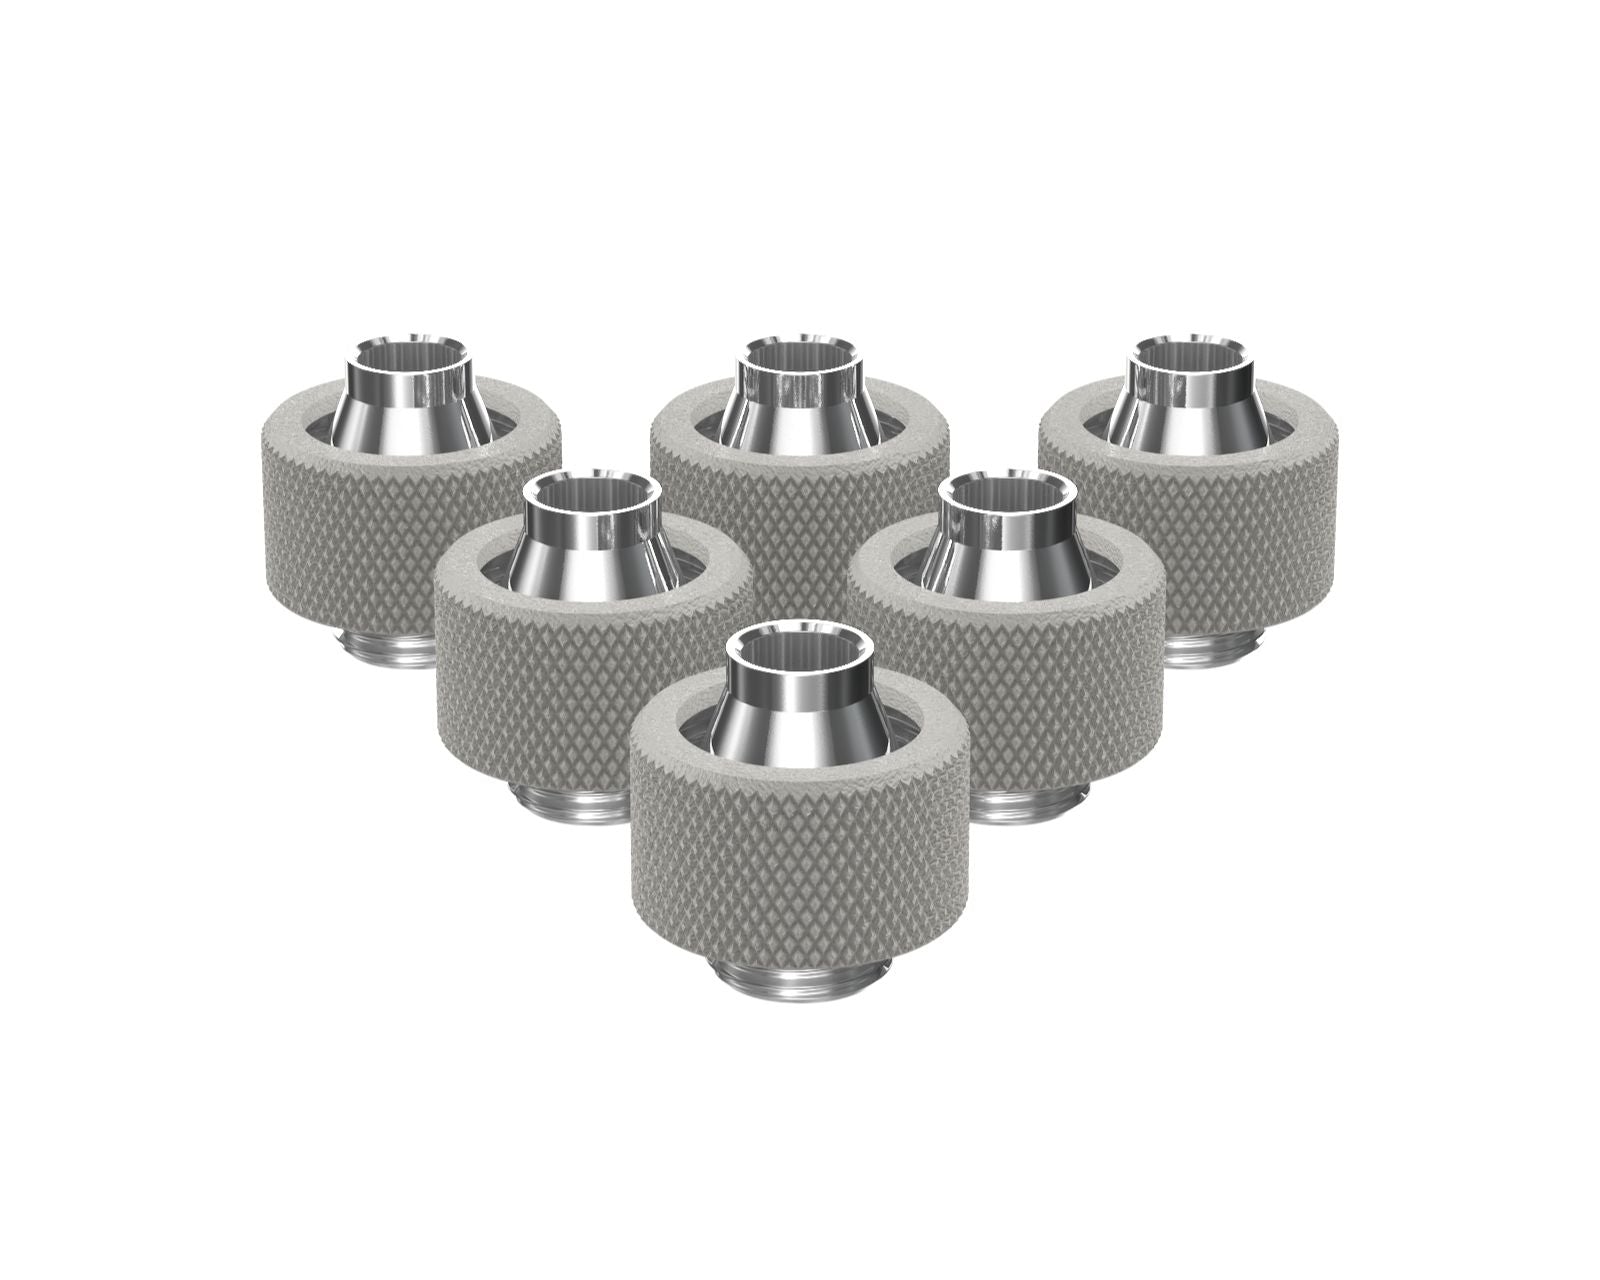 PrimoChill SecureFit SX - Premium Compression Fitting For 7/16in ID x 5/8in OD Flexible Tubing 6 Pack (F-SFSX758-6) - Available in 20+ Colors, Custom Watercooling Loop Ready - TX Matte Silver